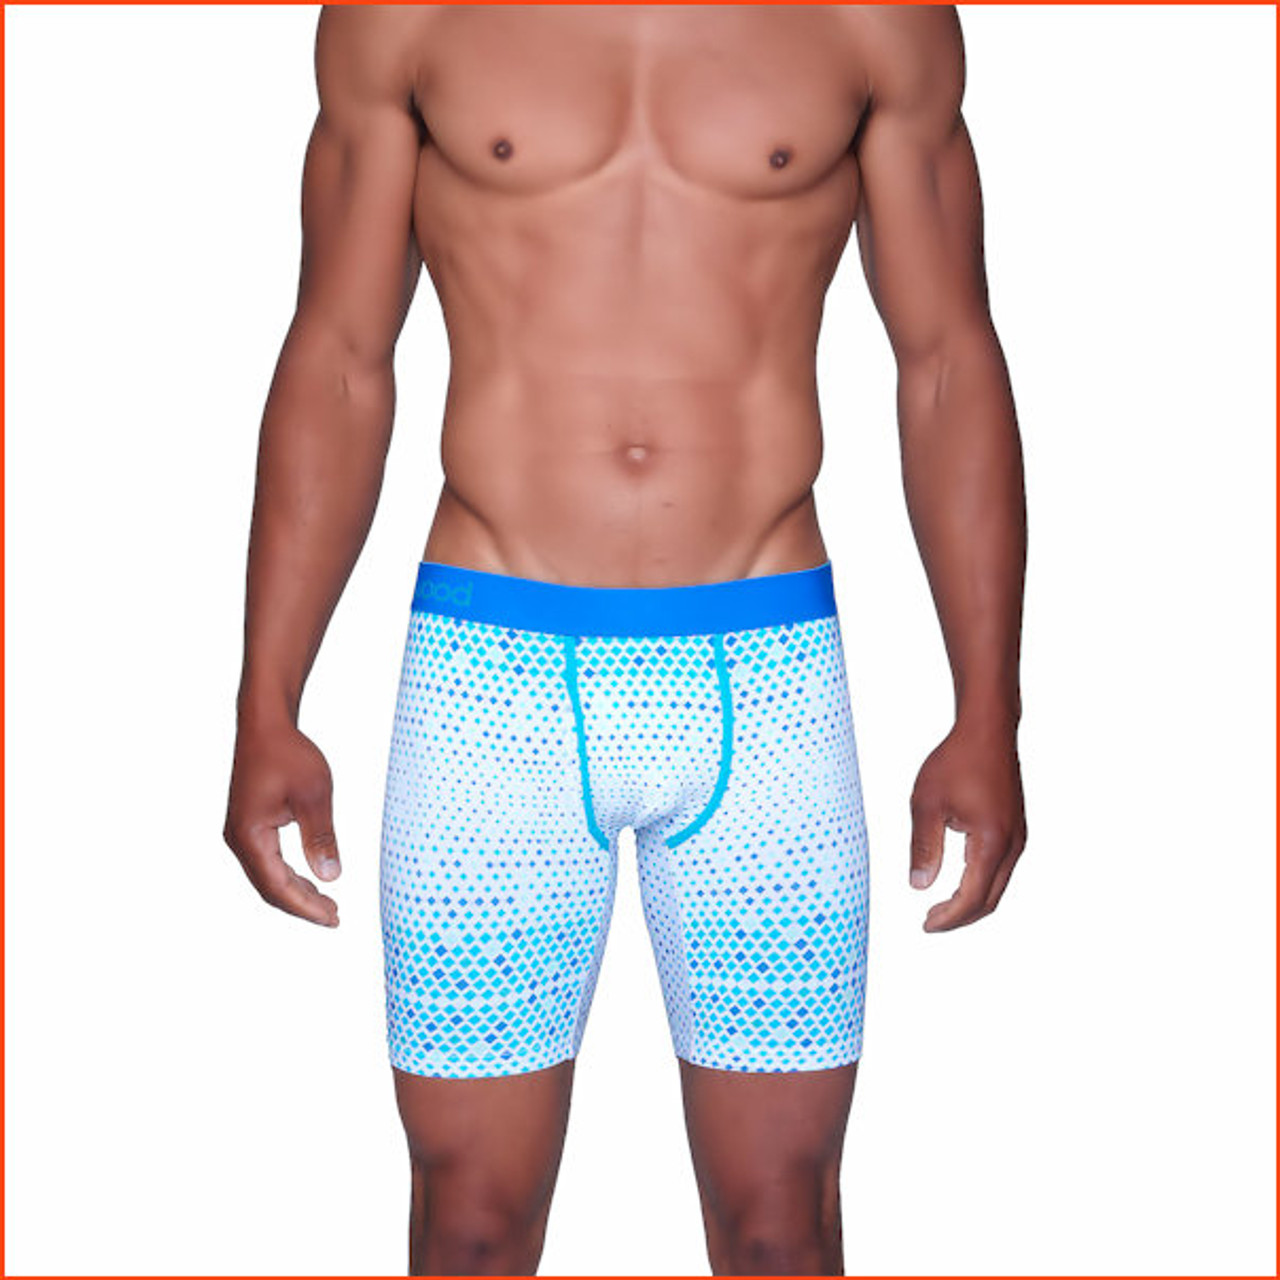 Wood Boxer Brief W/Fly